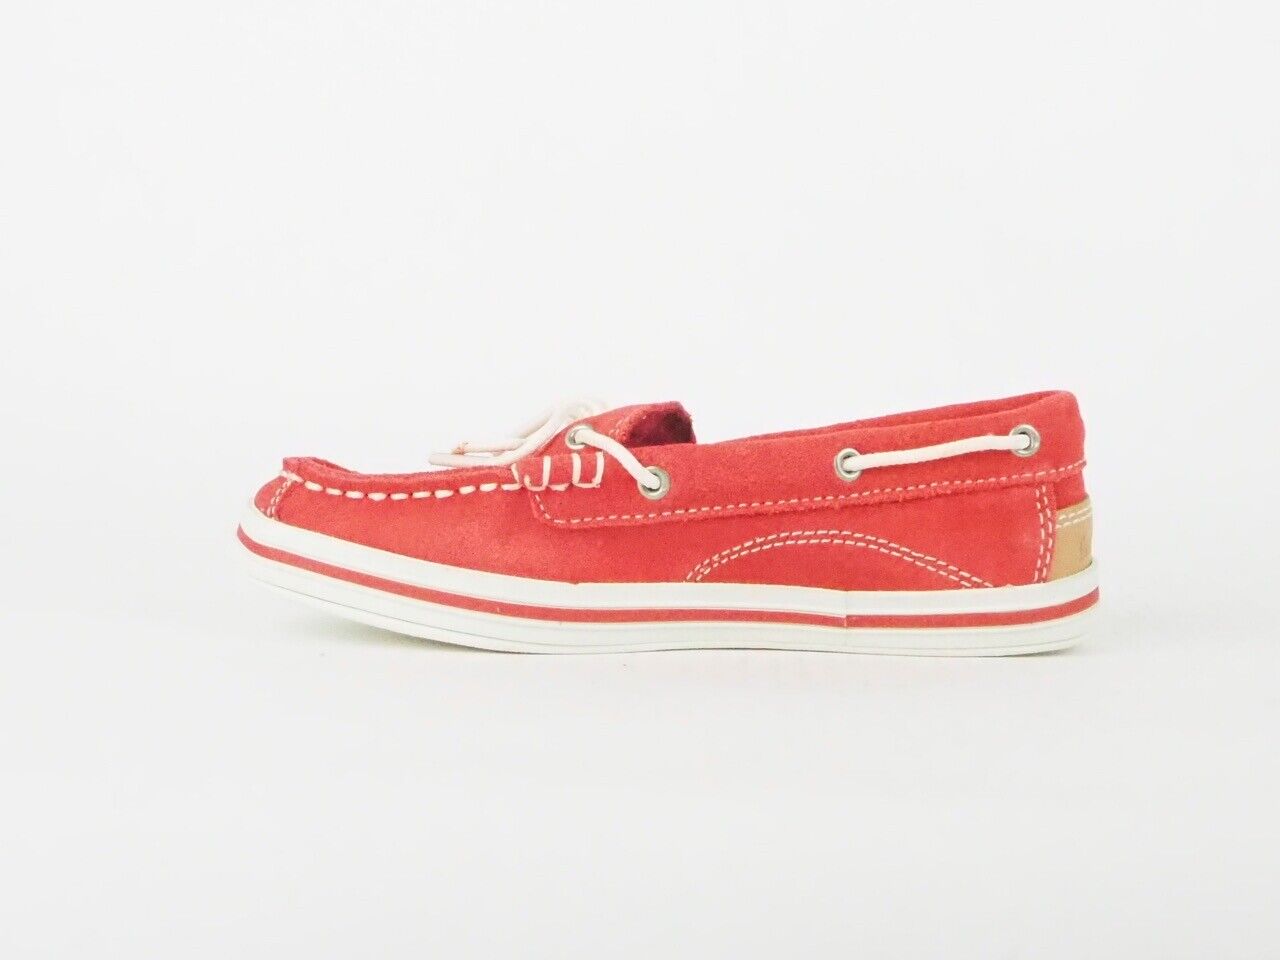 Kids Timberland 2 Eye Boat 7272R Red Leather Casual Slip On Shoes